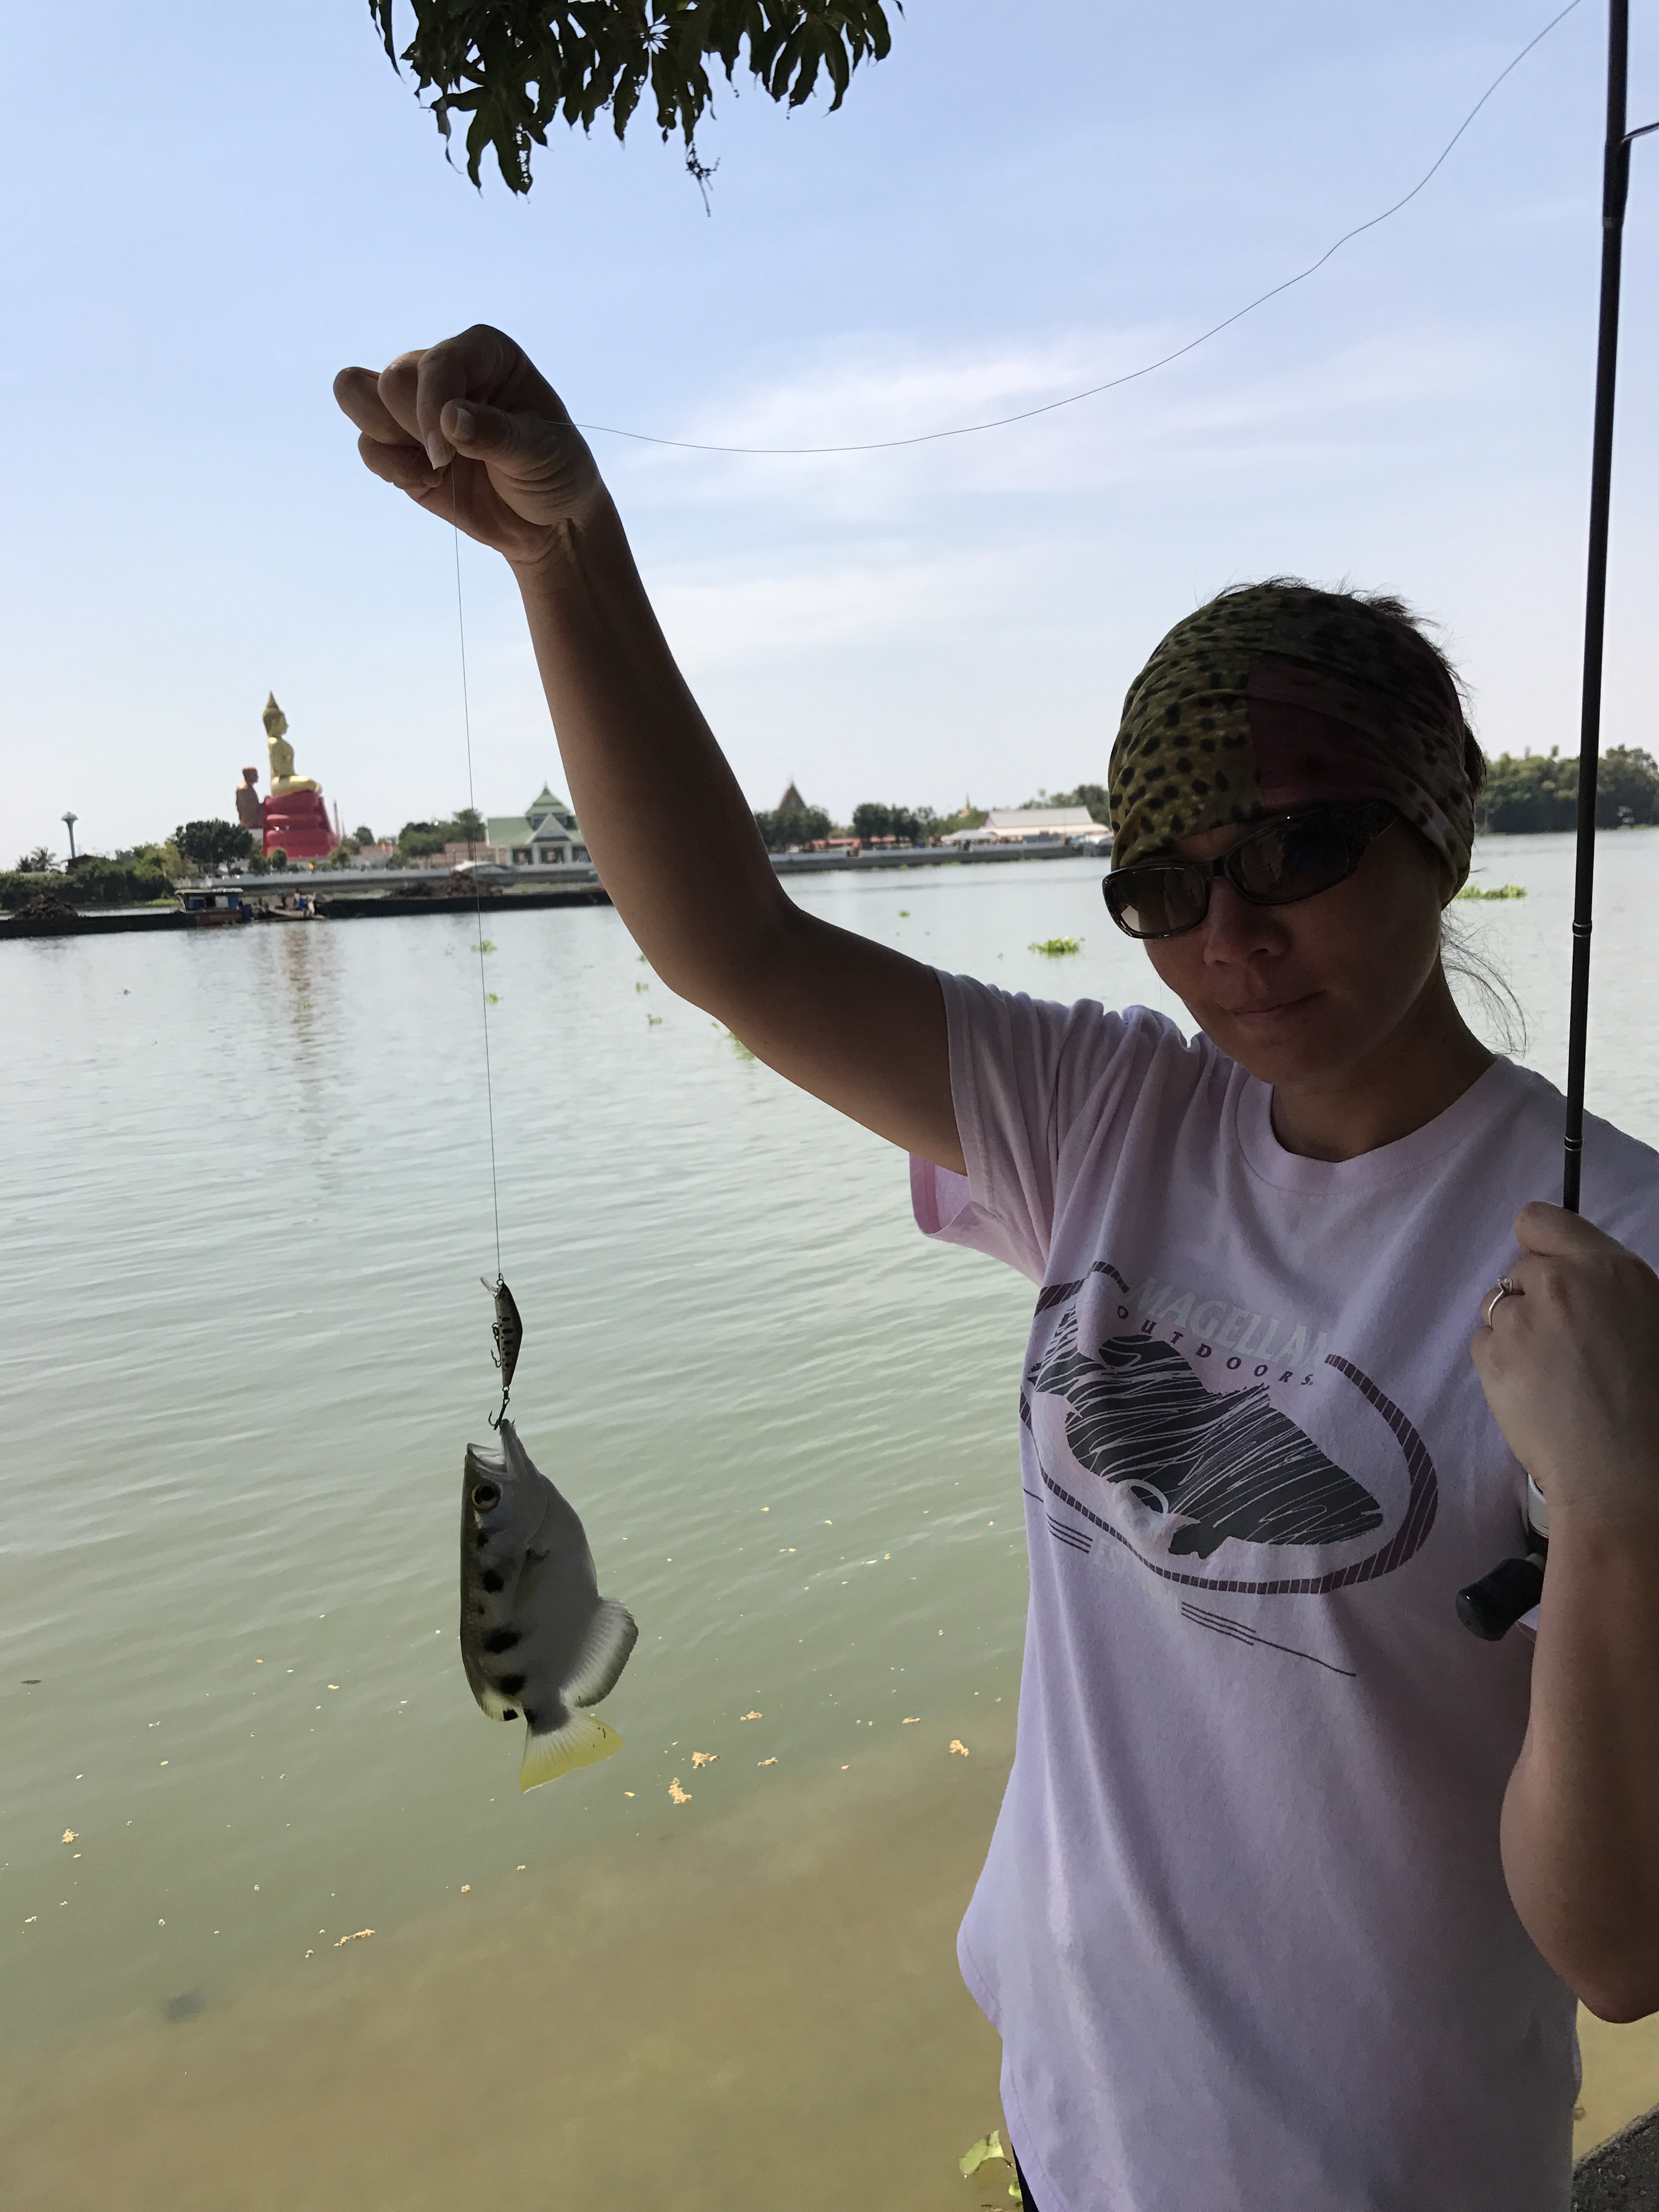 Chao Phraya River: wild fishing in the city - Cafes and Campfires